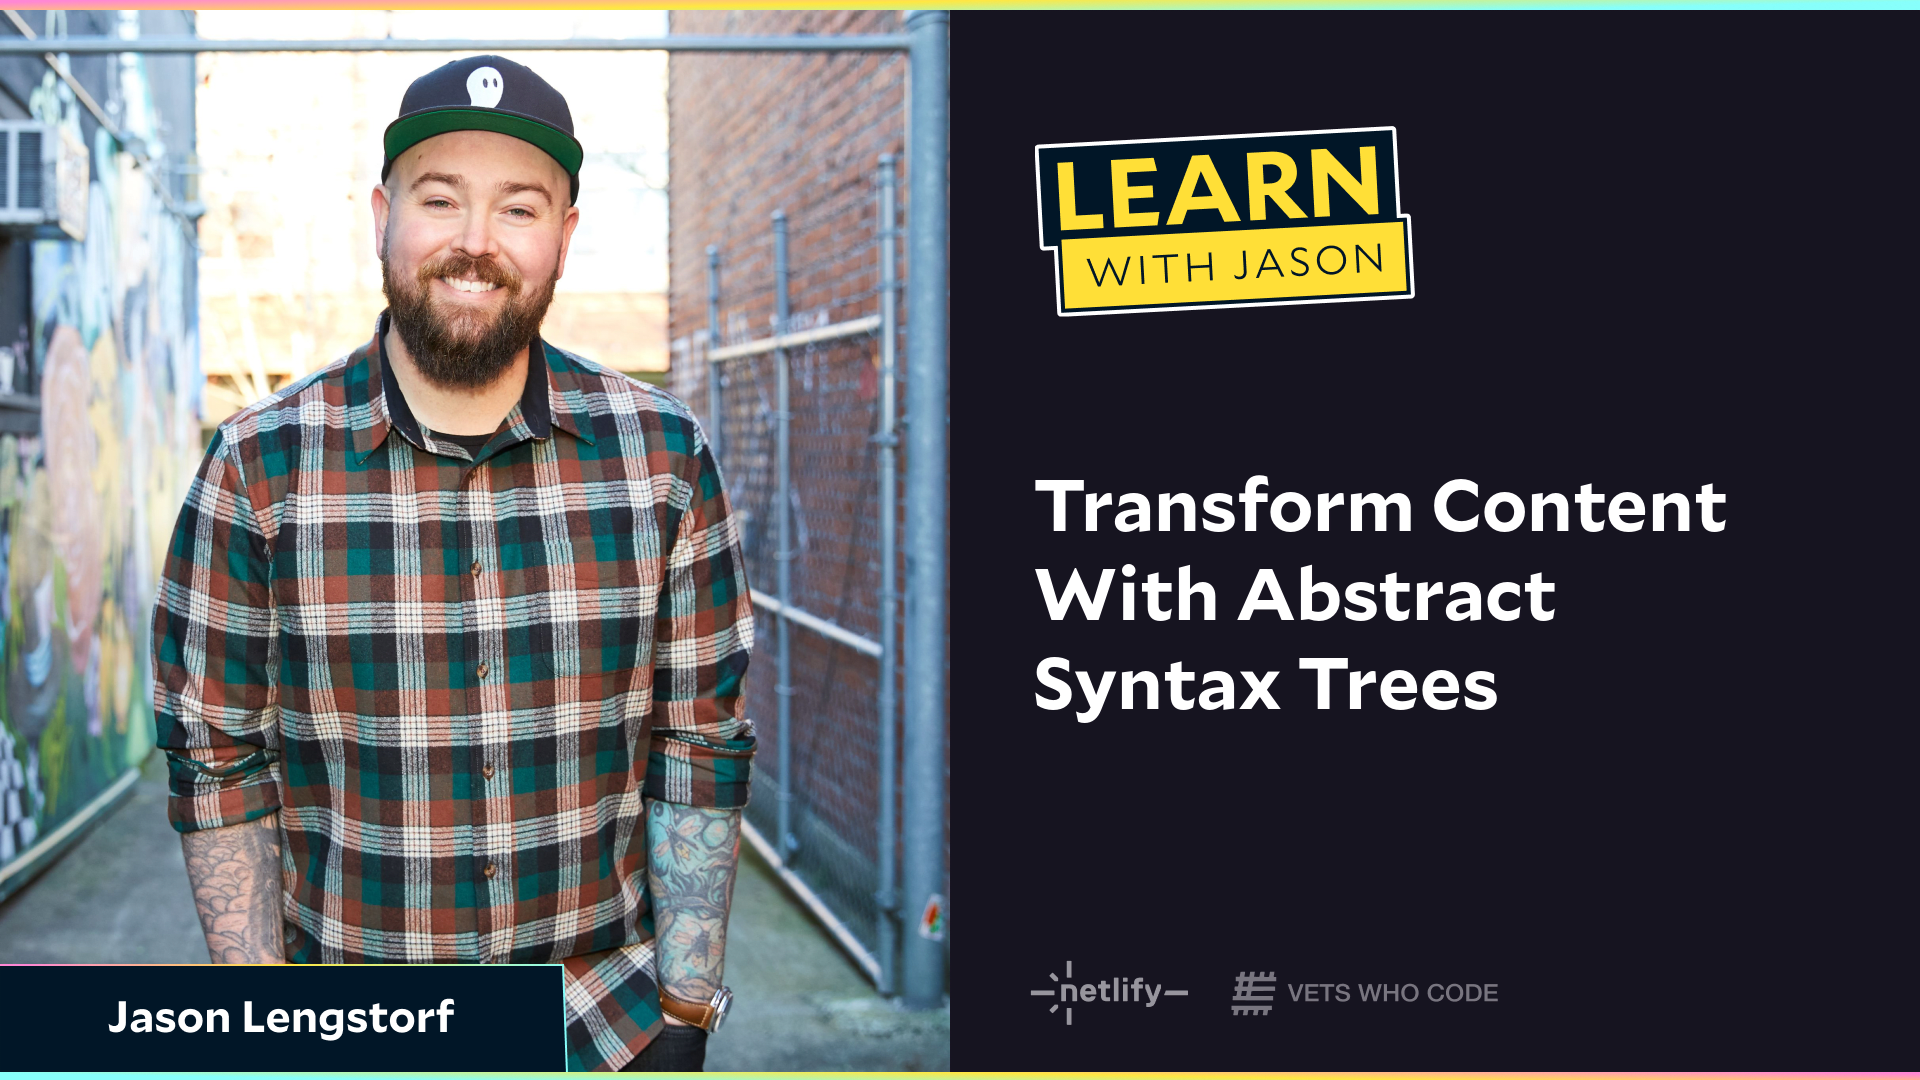 Transform Content With Abstract Syntax Trees (with Jason Lengstorf)